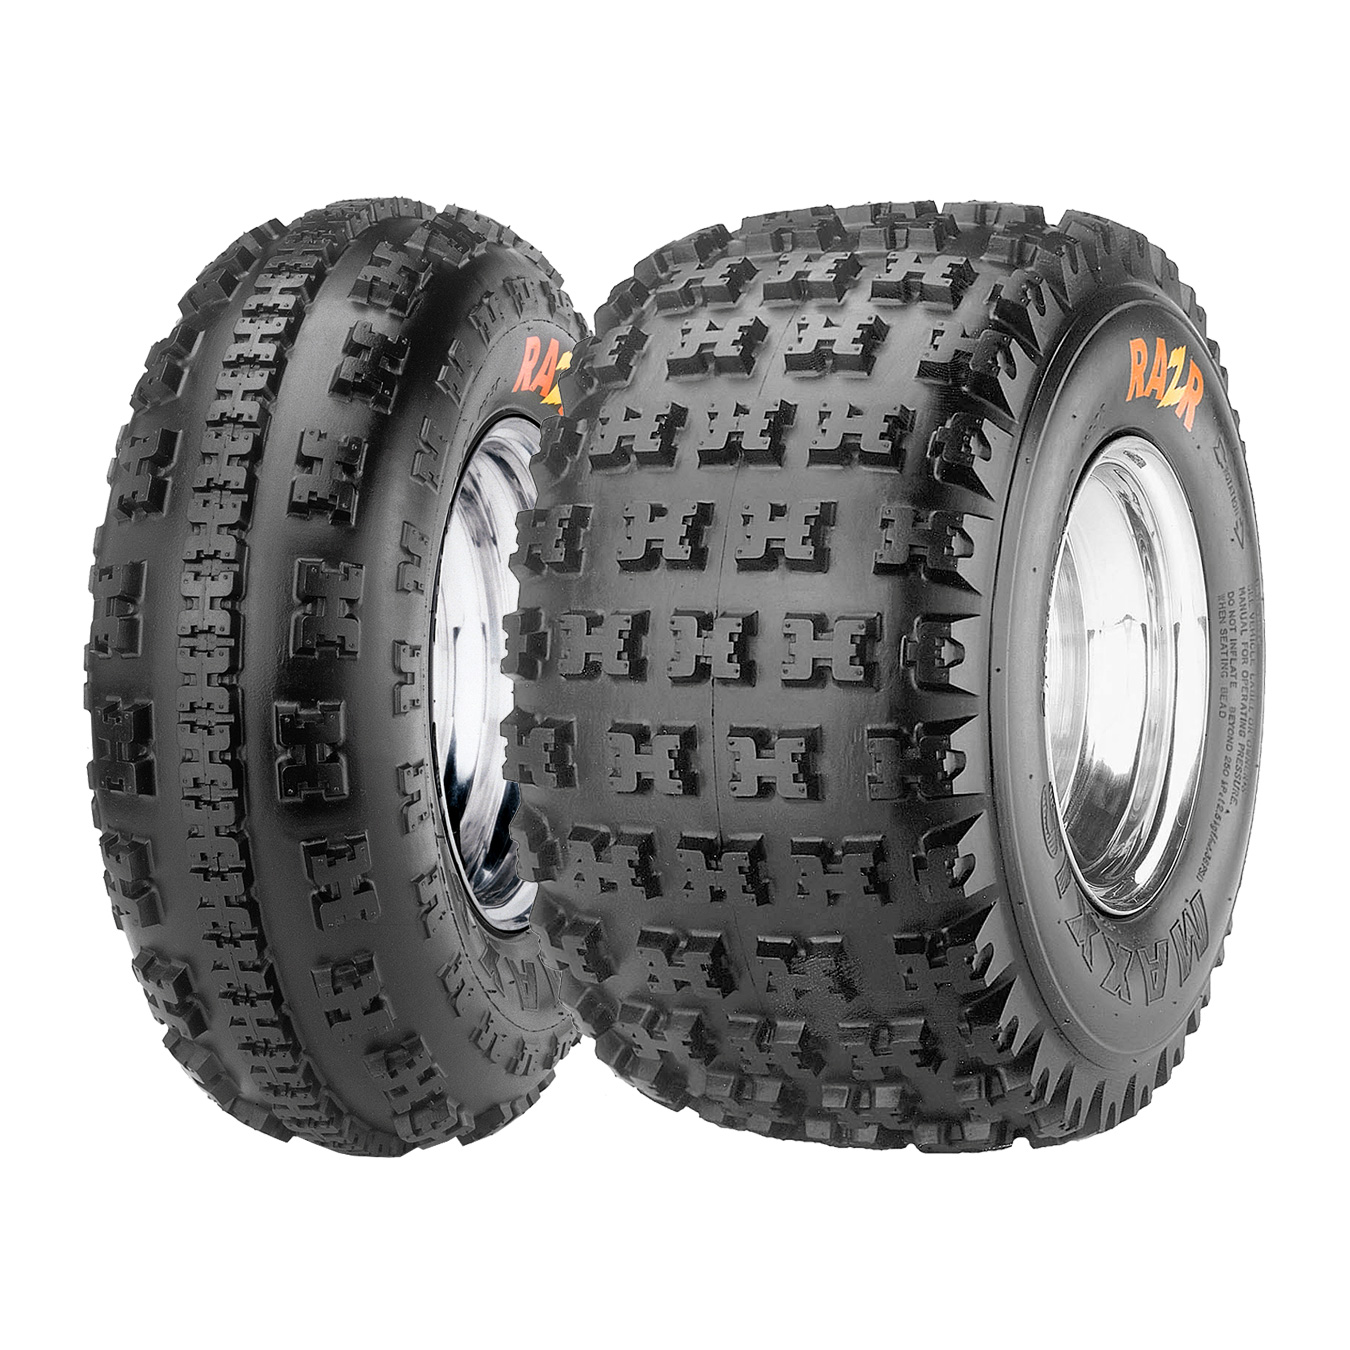 Maxxis TM07200000 Razr ATV Tire 20x11x9 20-11-9 For XC and Off-Road Racing